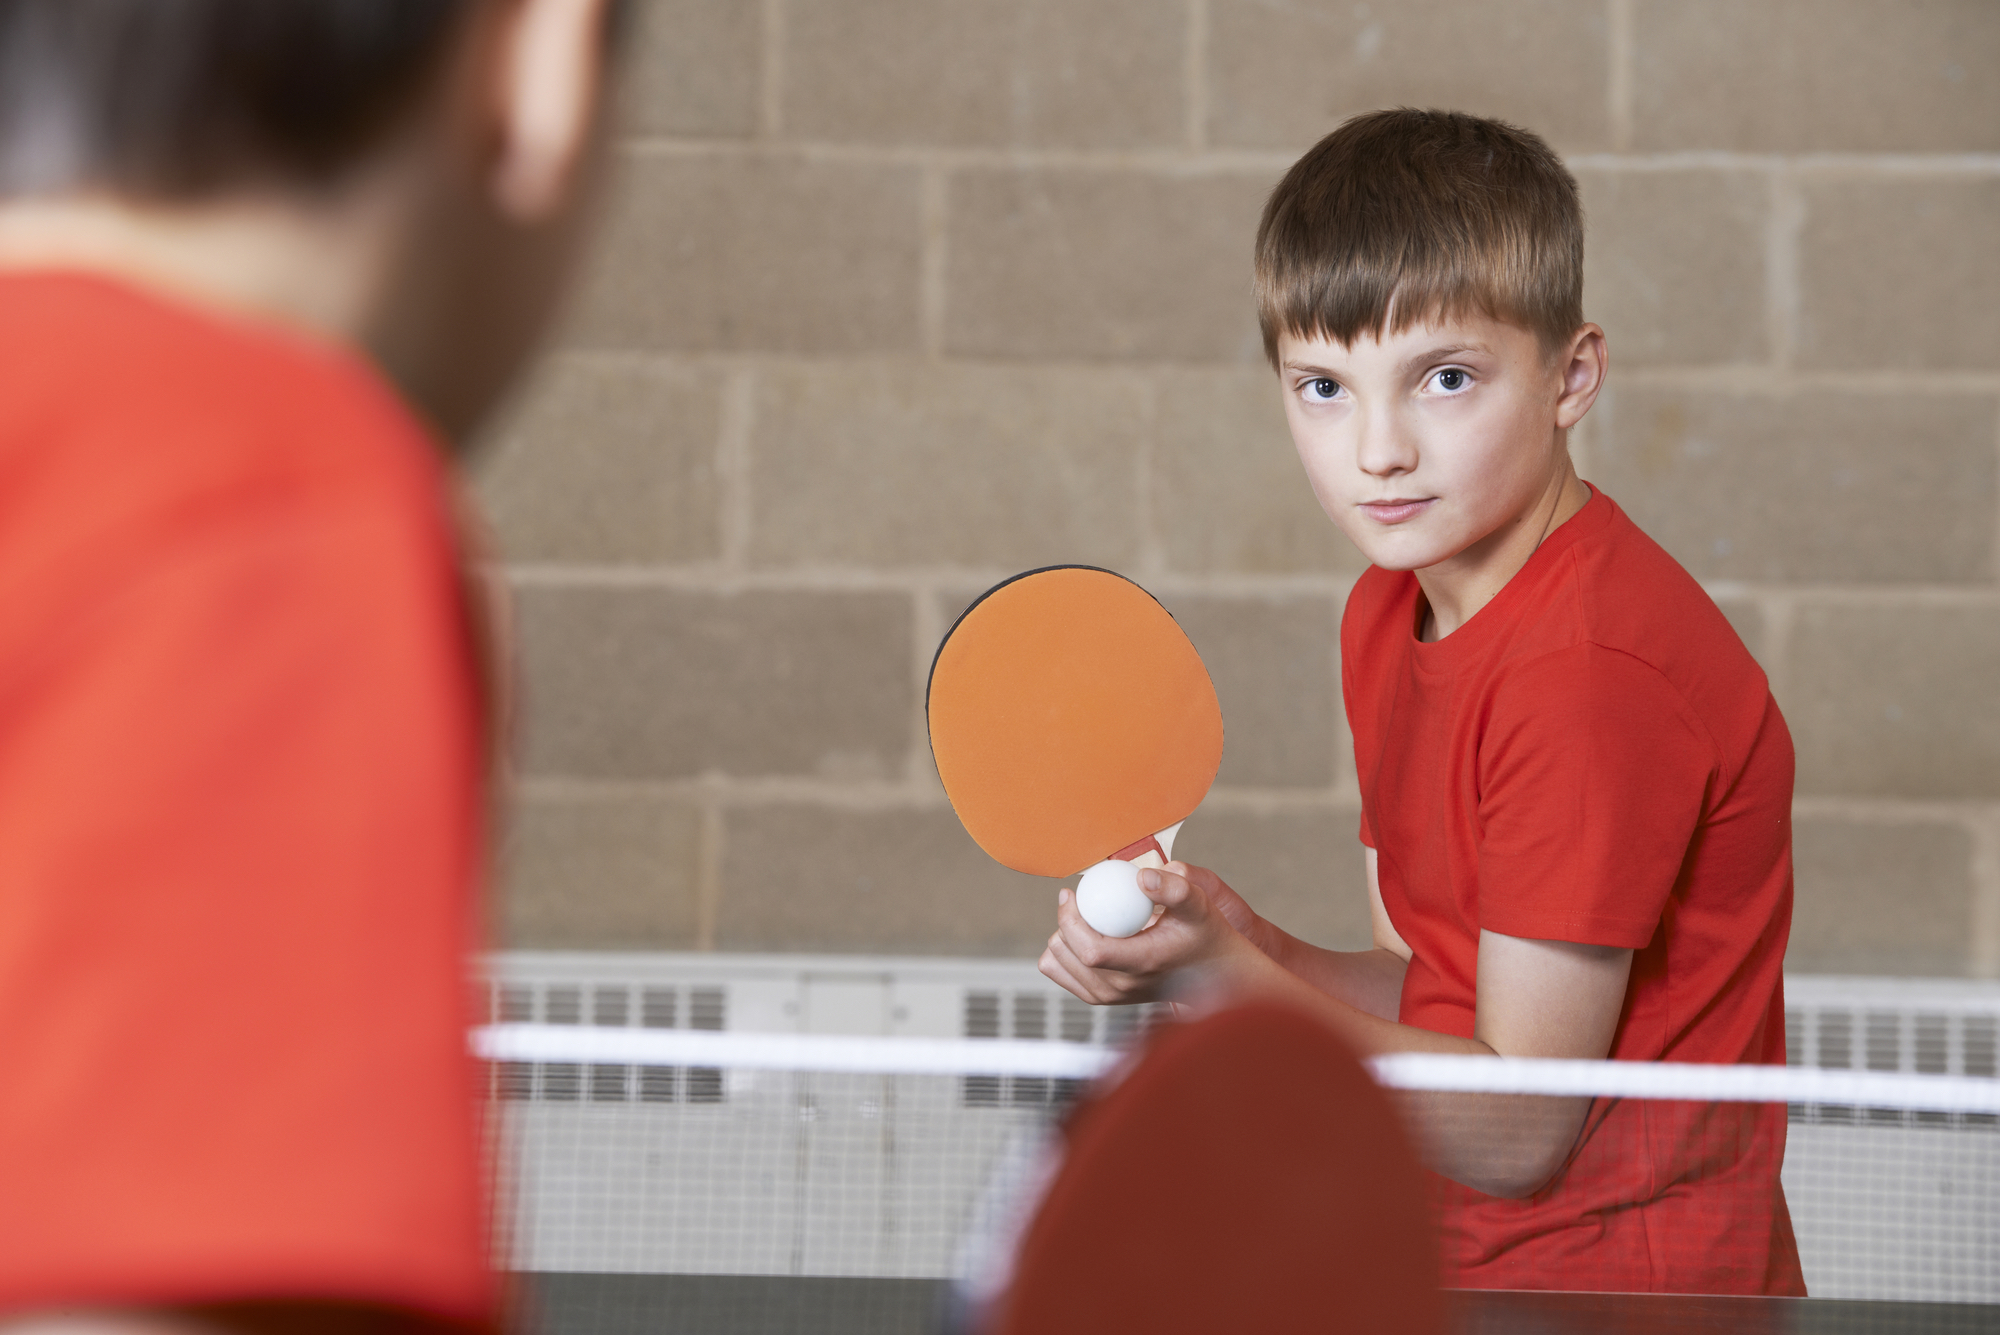 Two Boys Playing Table Tennis Match In School Gym